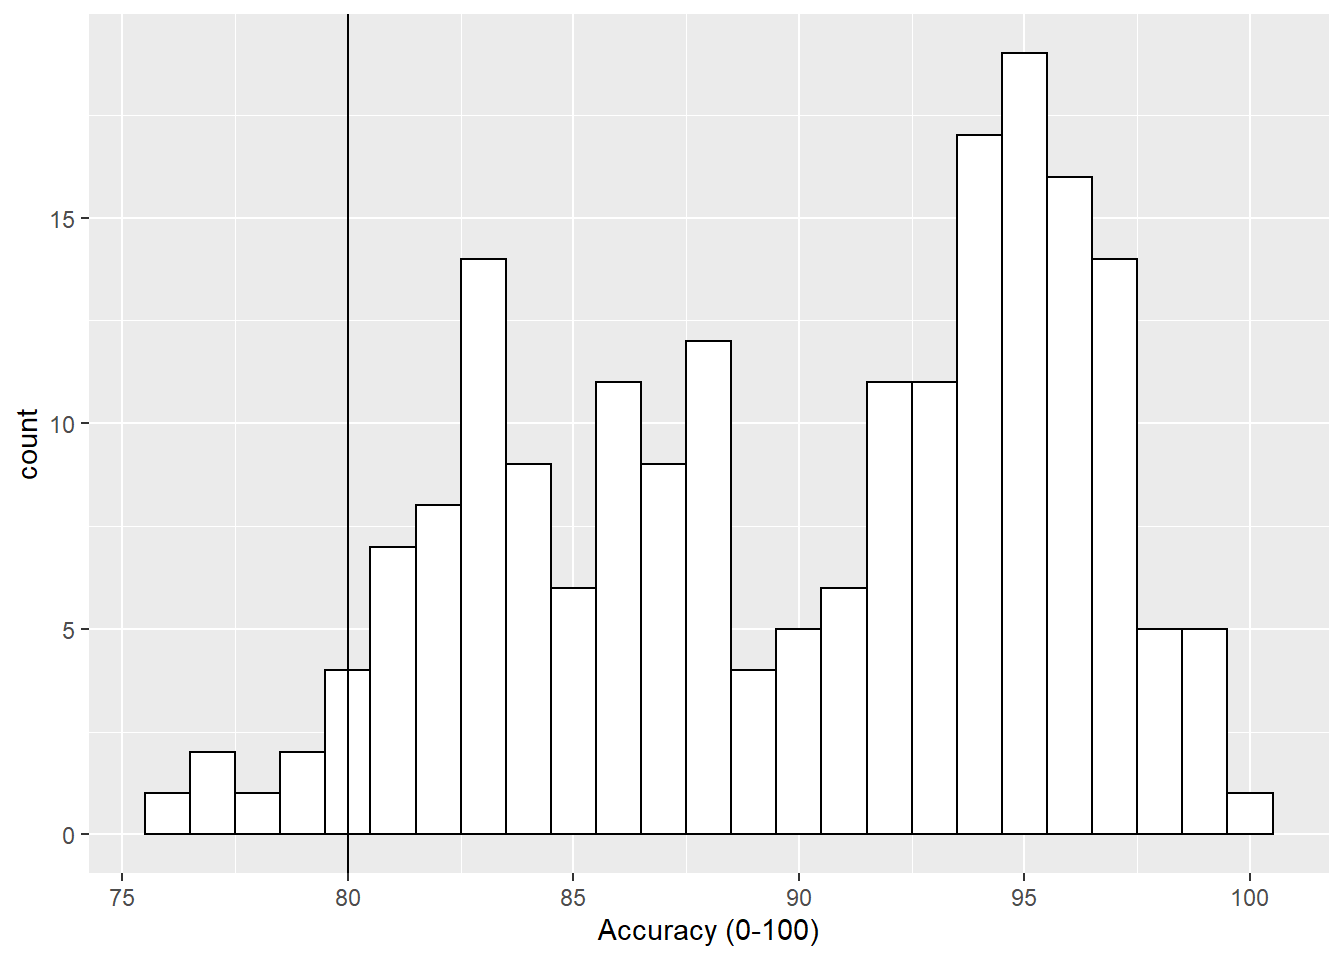 Histogram of accuracy scores with black solid vertical line indicating 80% accuracy.